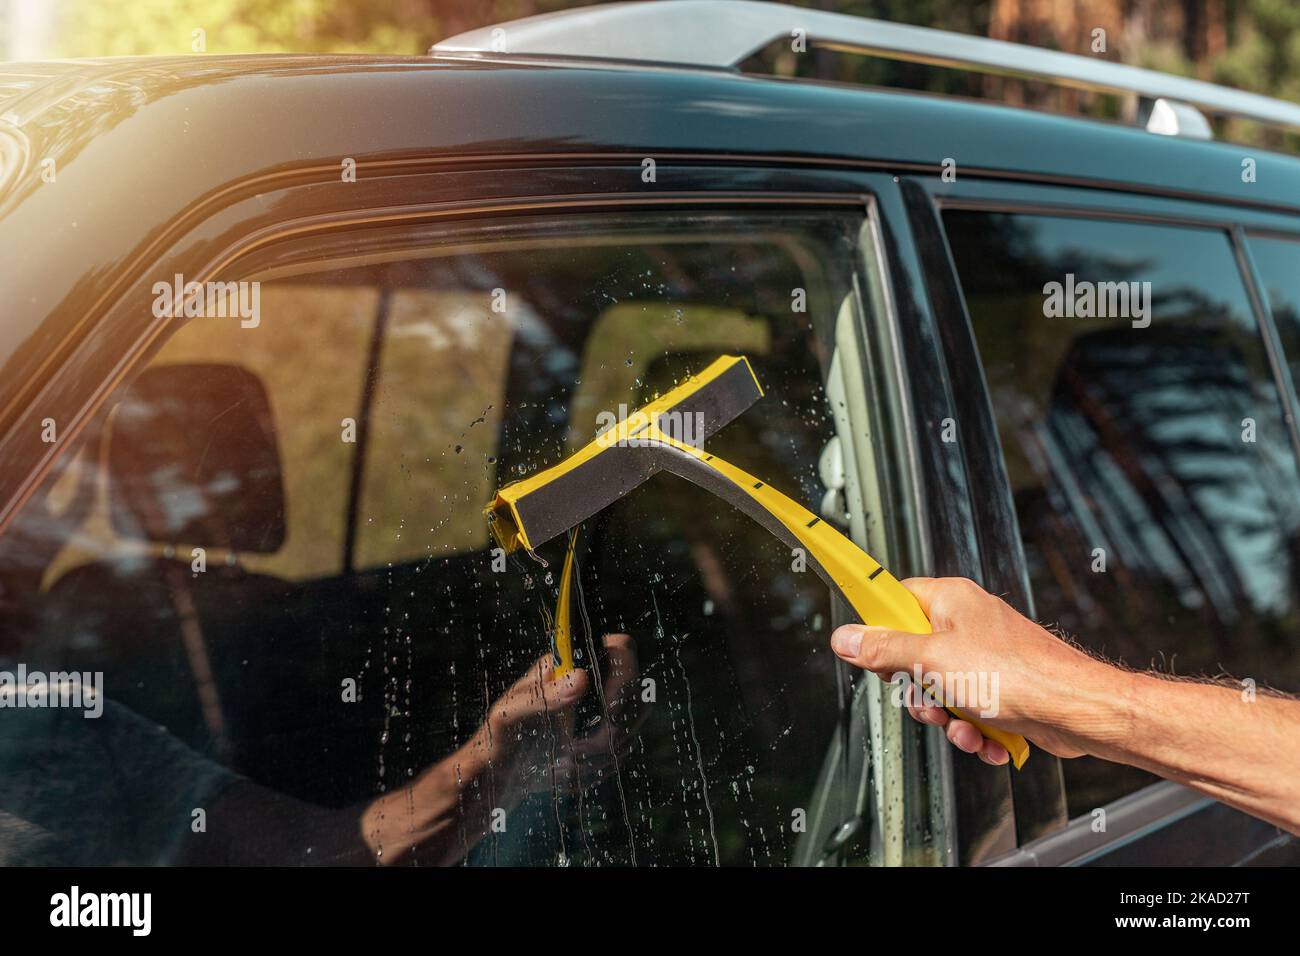 Male hand with car rubber cleaner cleaning and washing automobile side window. Stock Photo